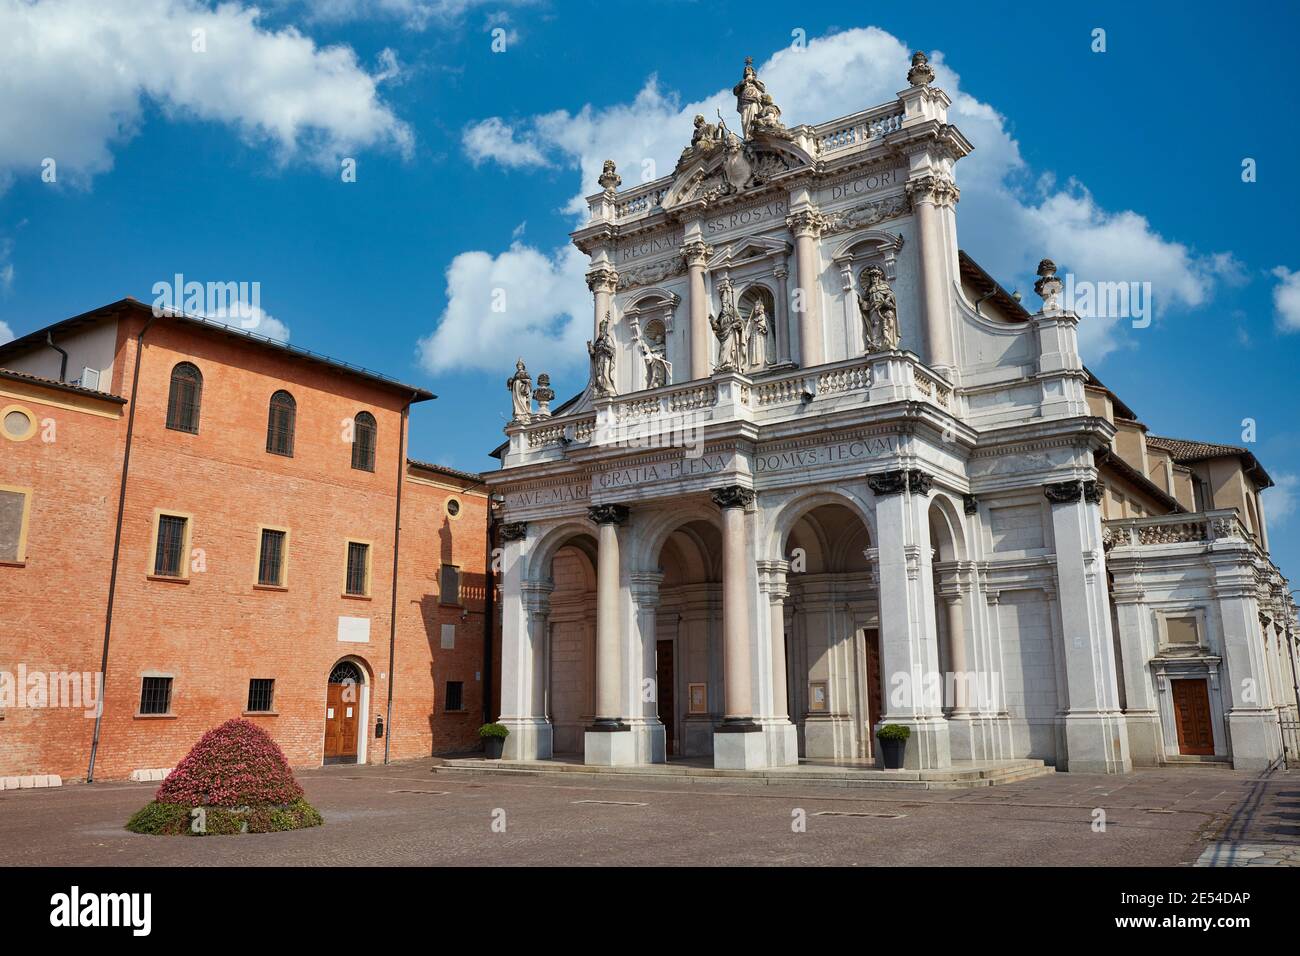 Sanctuary of the Blessed Virgin of the Rosary, minor basilica in Fontanellato, Parma. Stock Photo